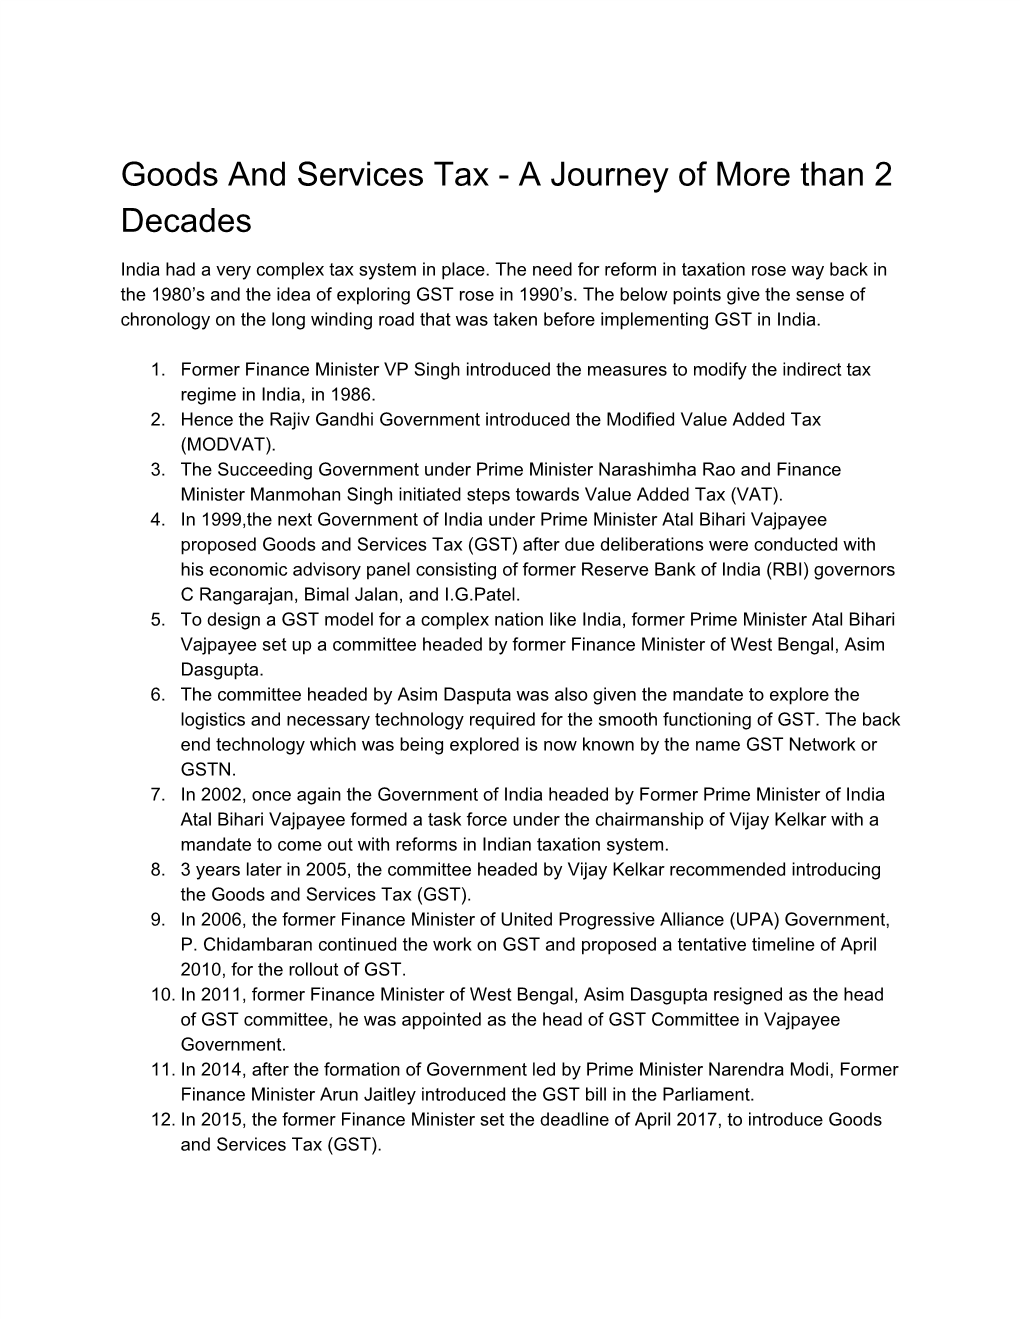 Goods and Services Tax - a Journey of More Than 2 Decades